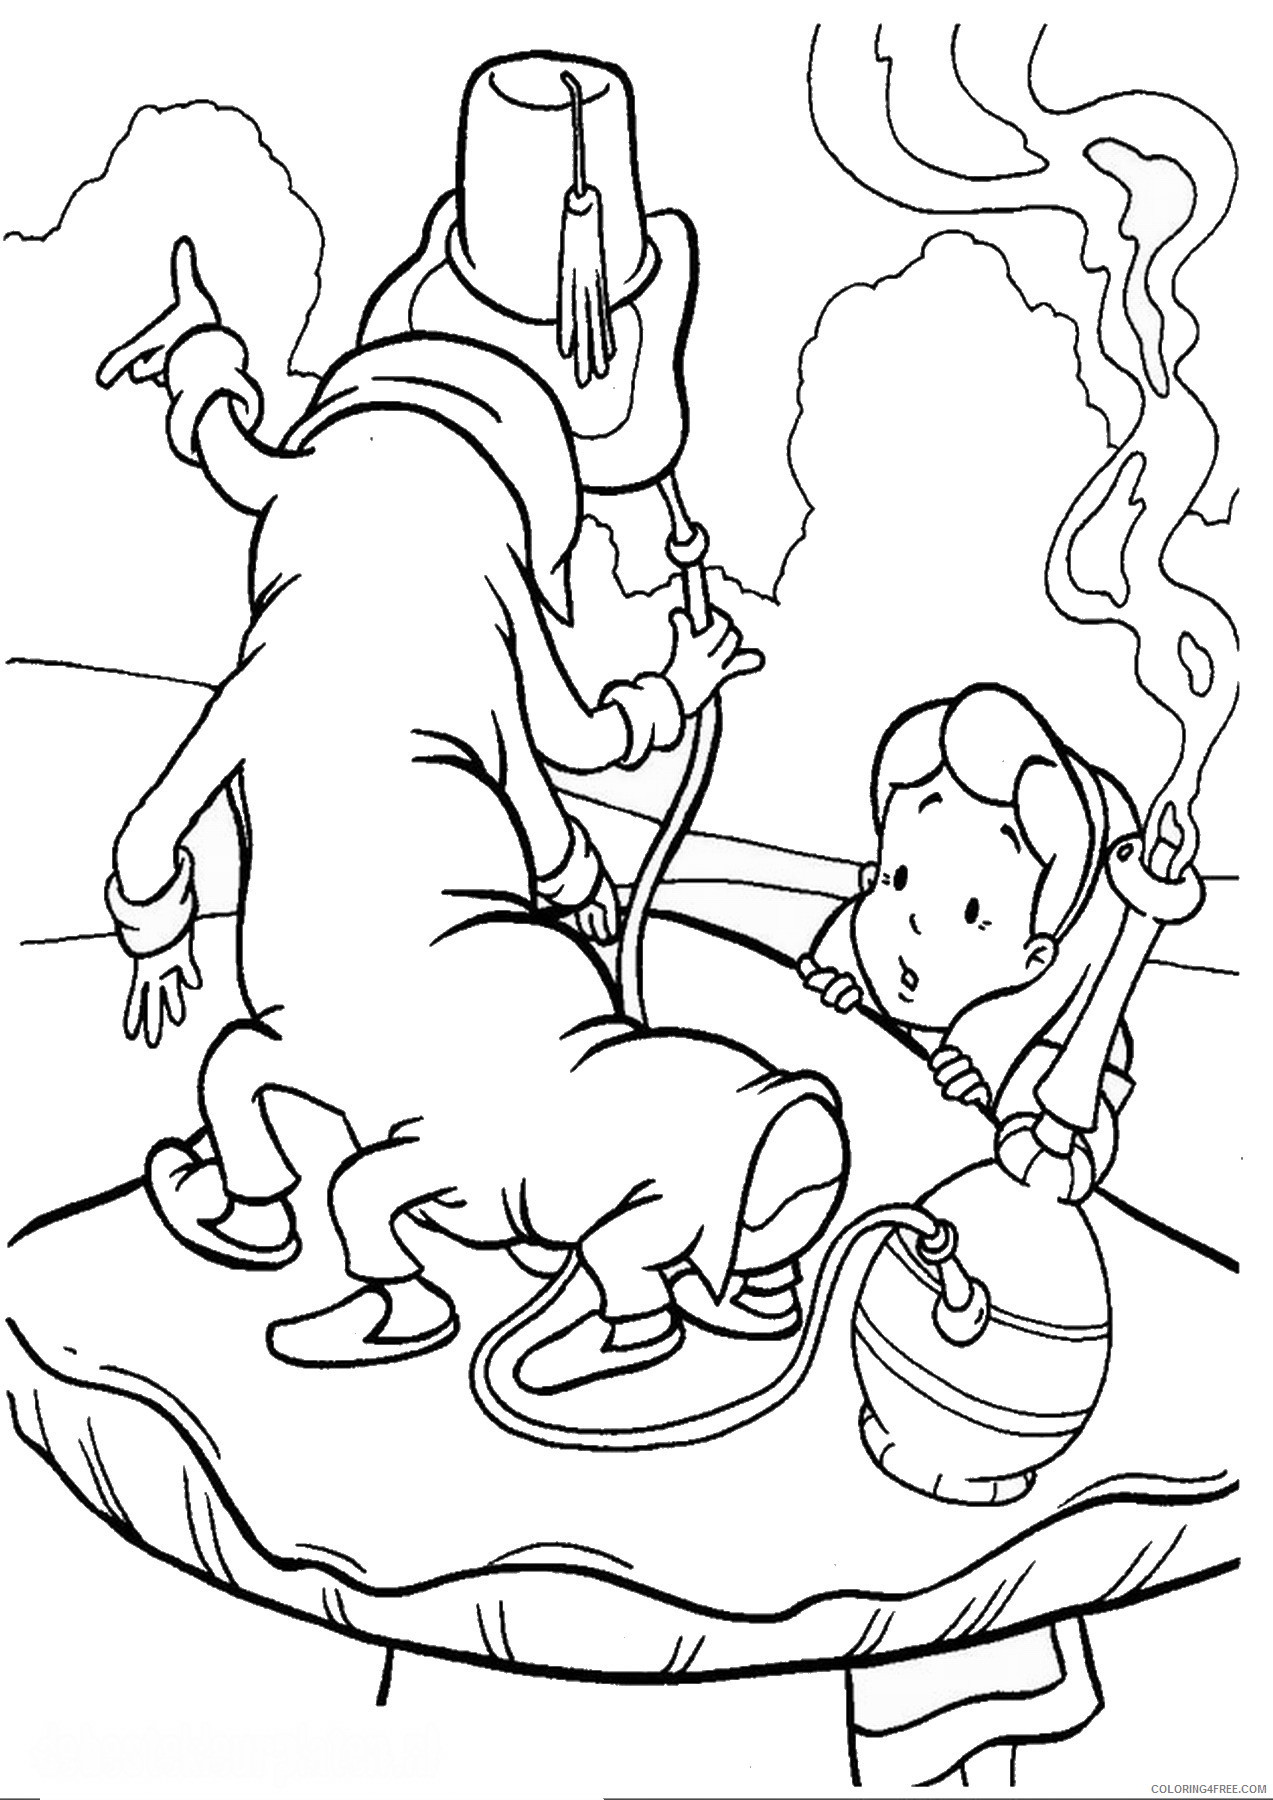 Alice in Wonderland Coloring Pages Cartoons alice_55 Printable 2020 0360 Coloring4free